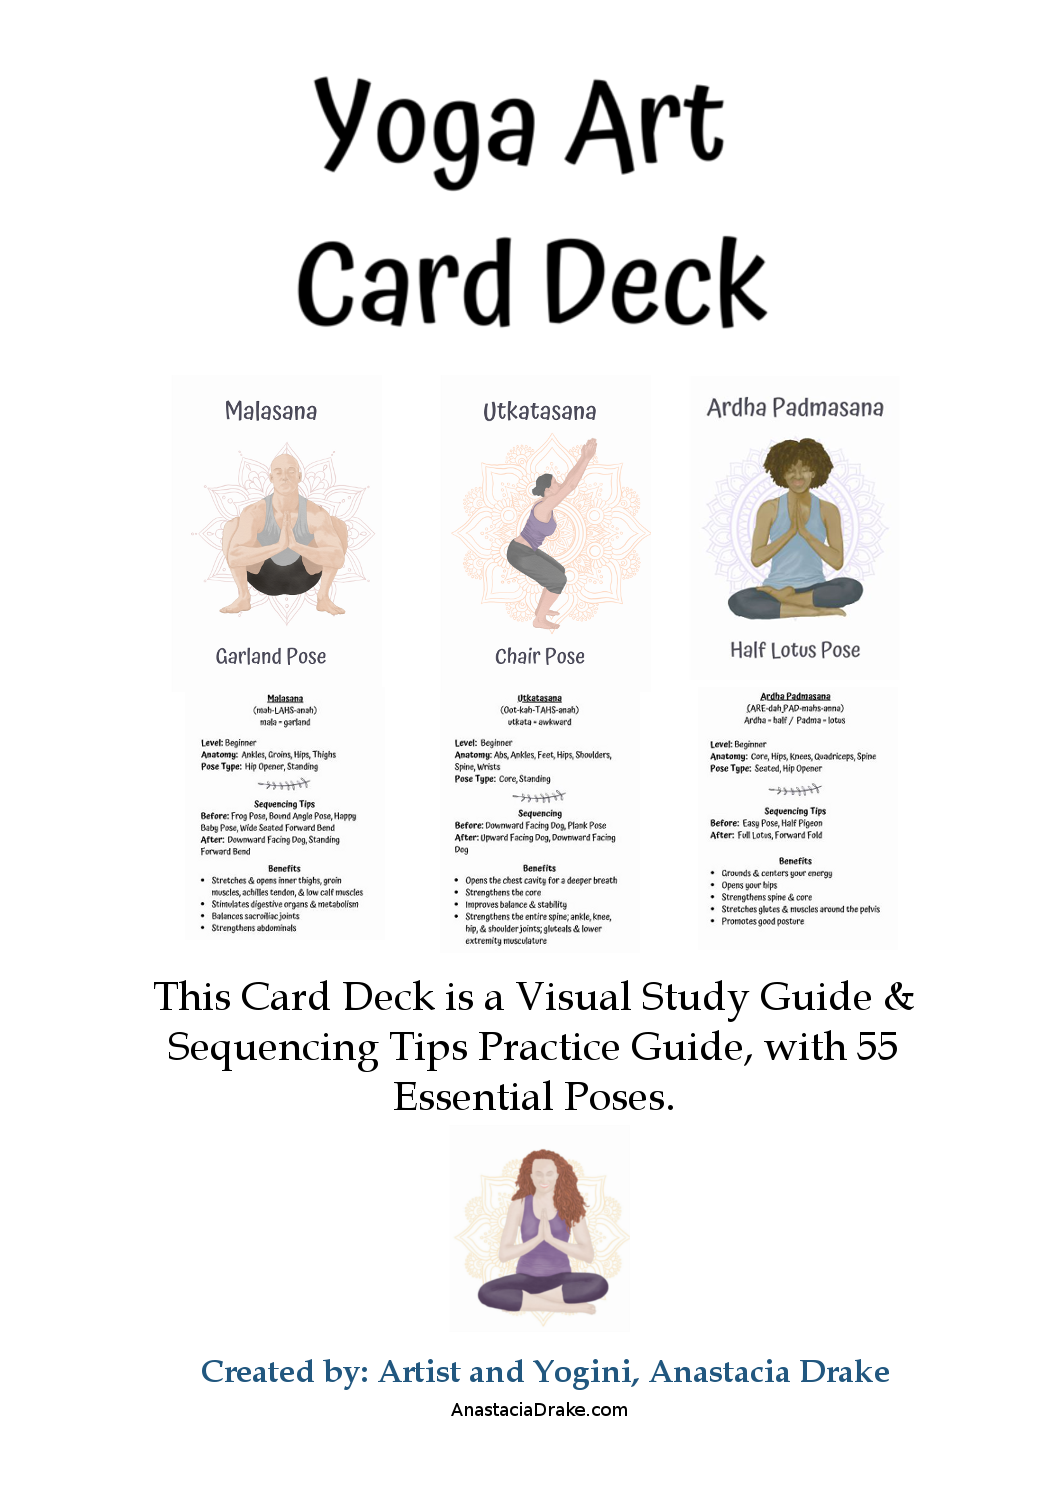 Yoga Art Card Deck: Visual Study and Practice Guide, Sequencing Tips & Practice Guide with Essential Poses, 55 Hand-Illustrated Cards with Sanskrit & English Asana Names